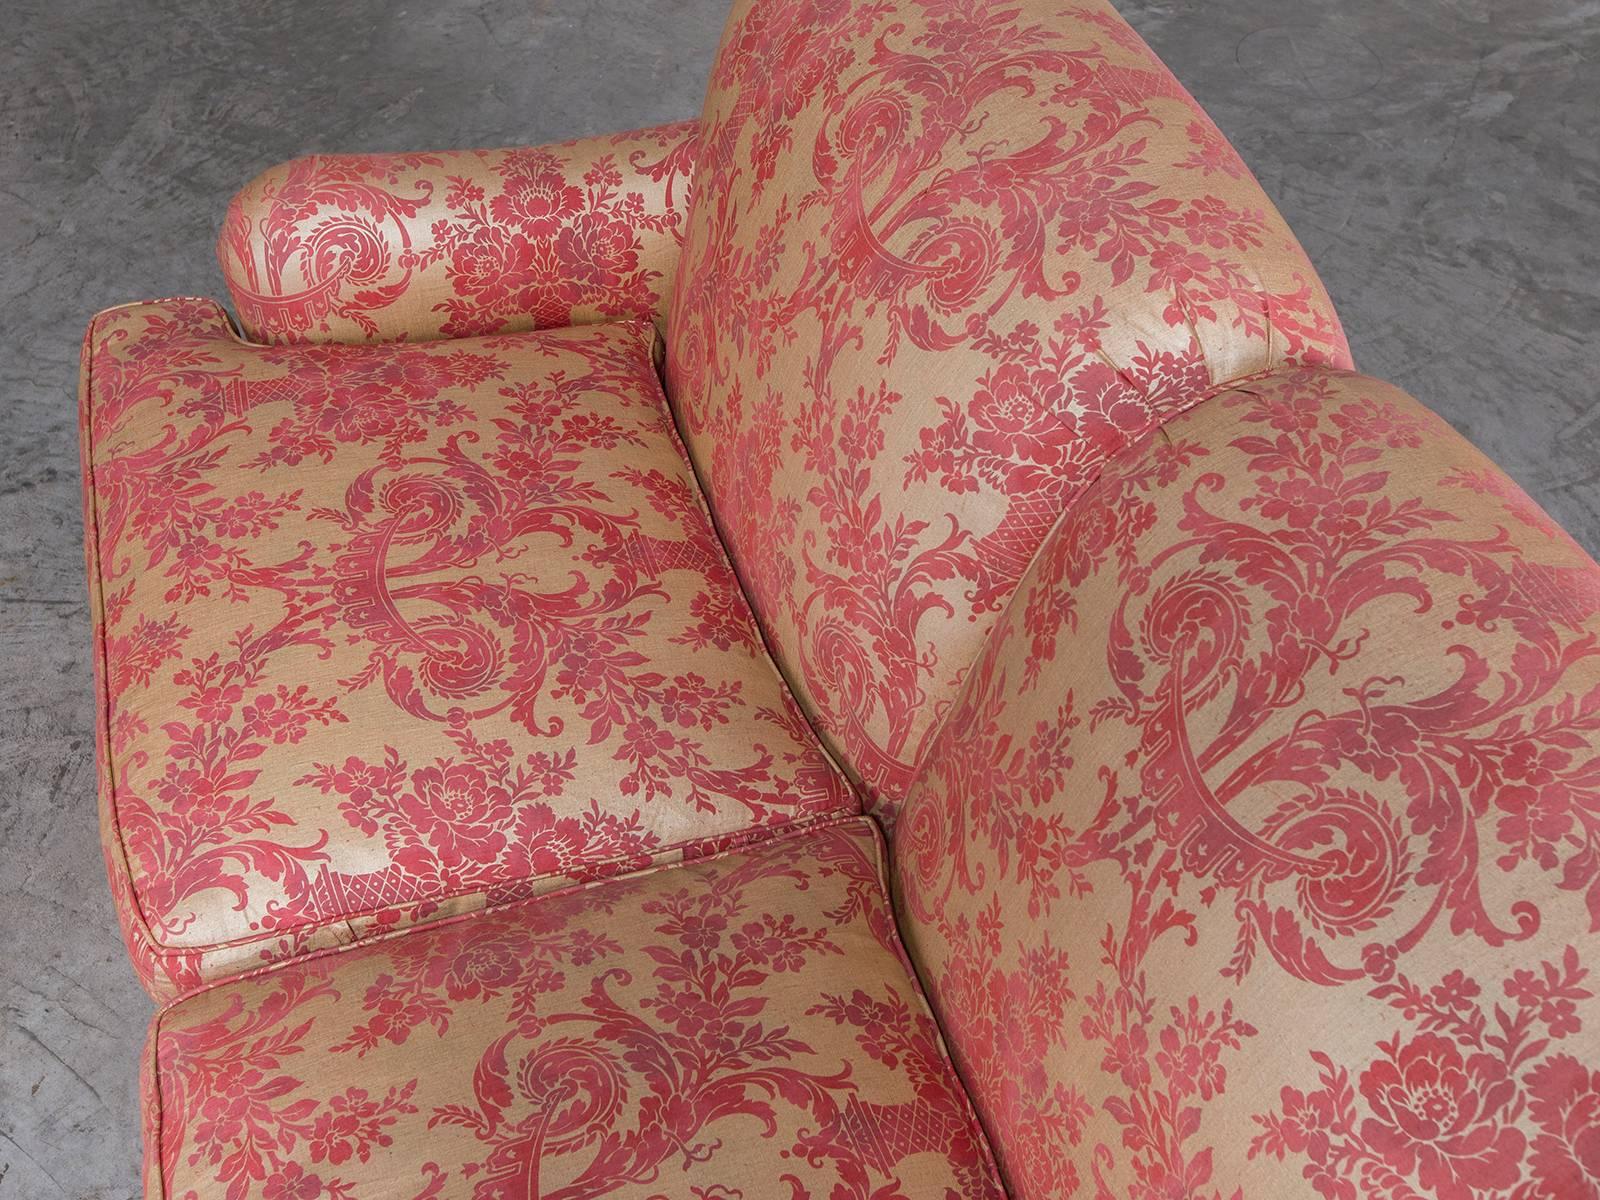 Late 20th Century Pair of Custom Fortuny Fabric Upholstered Sofas Offered Individually, 1990